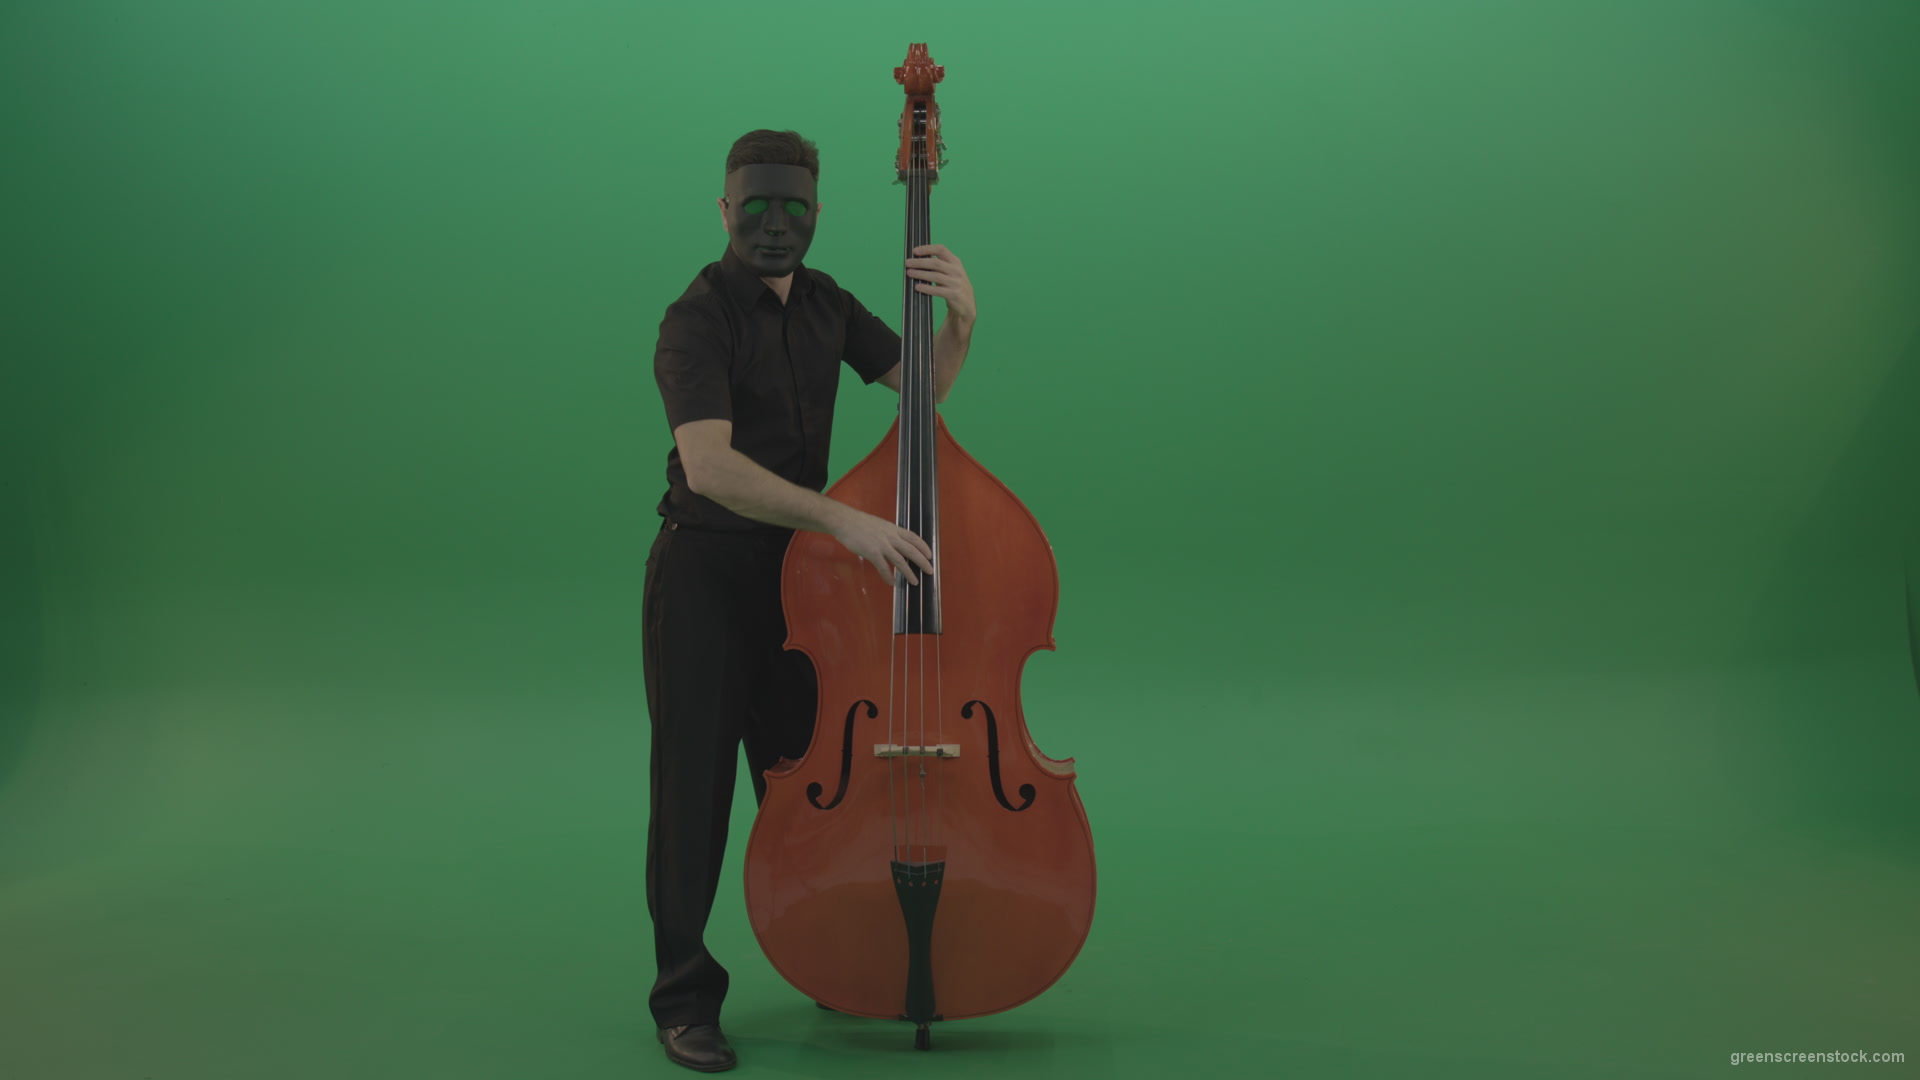 Full-size-man-in-black-gead-mask-with-chromakey-eyes-play-jazz-on-double-bass-String-music-instrument-isolated-on-green-screen_002 Green Screen Stock